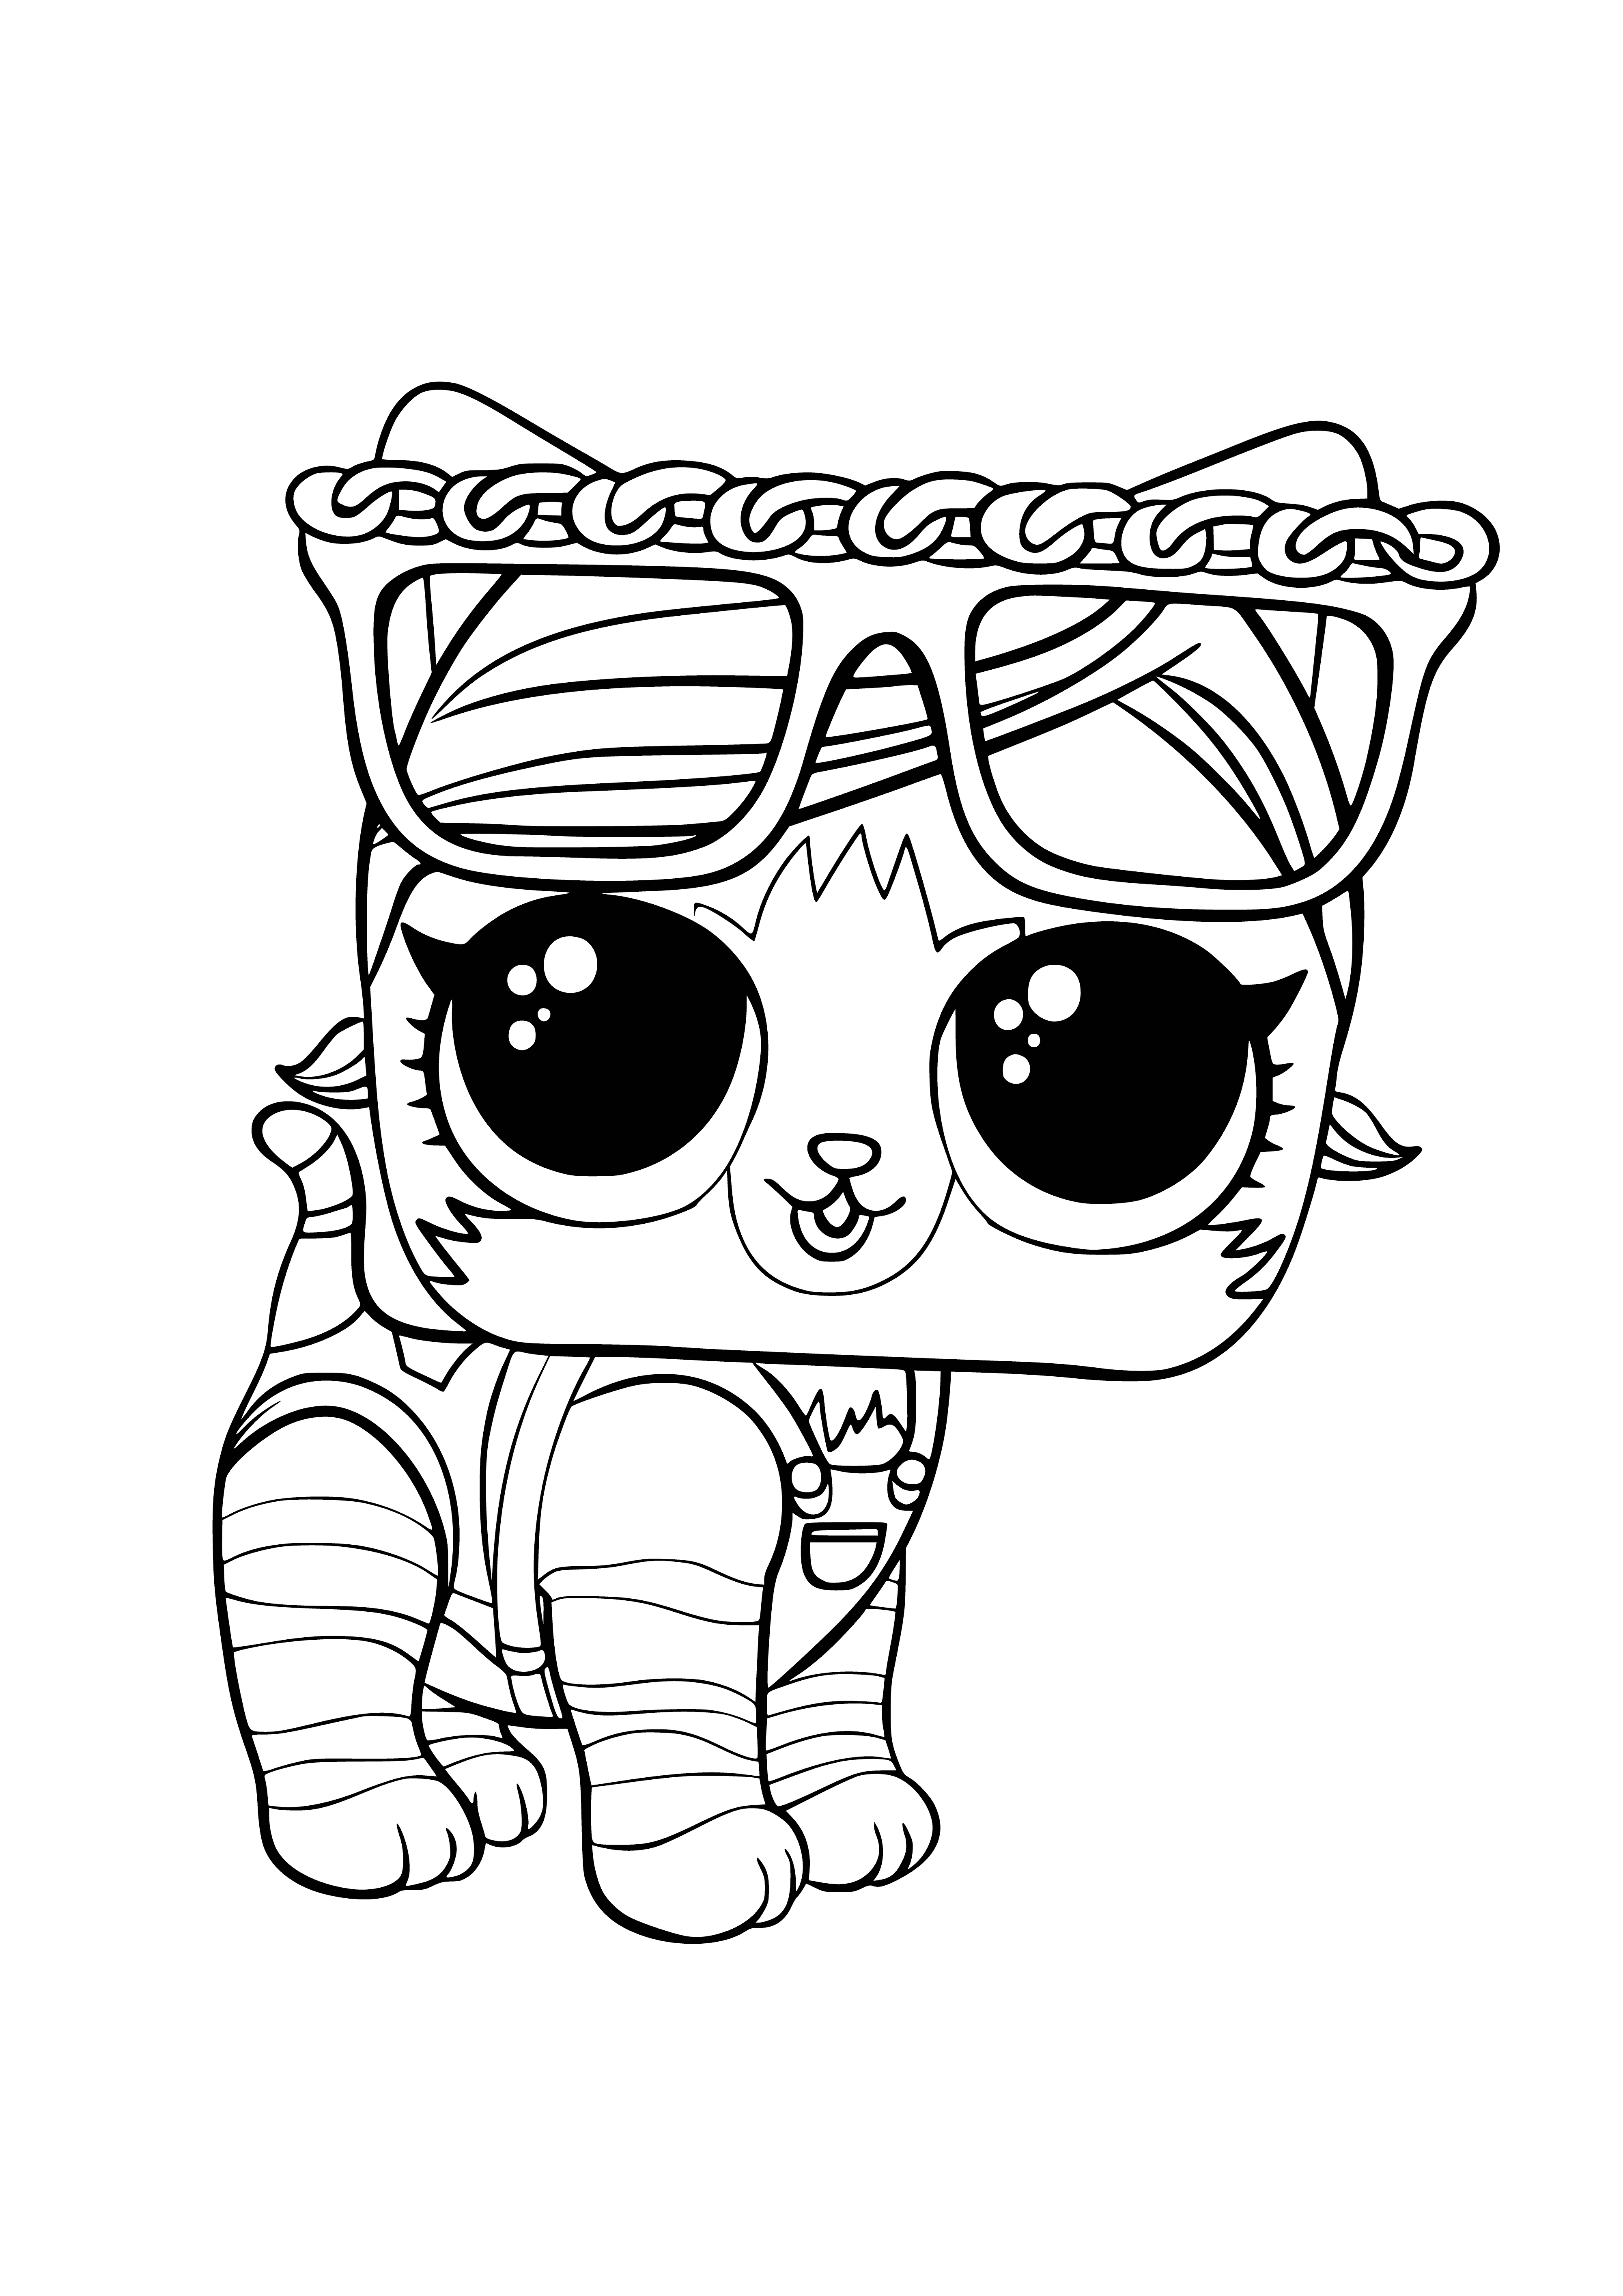 coloring page: Small, blue-eyed kitten with big ears, pink nose & purple collar w/ bell sits on white surface.